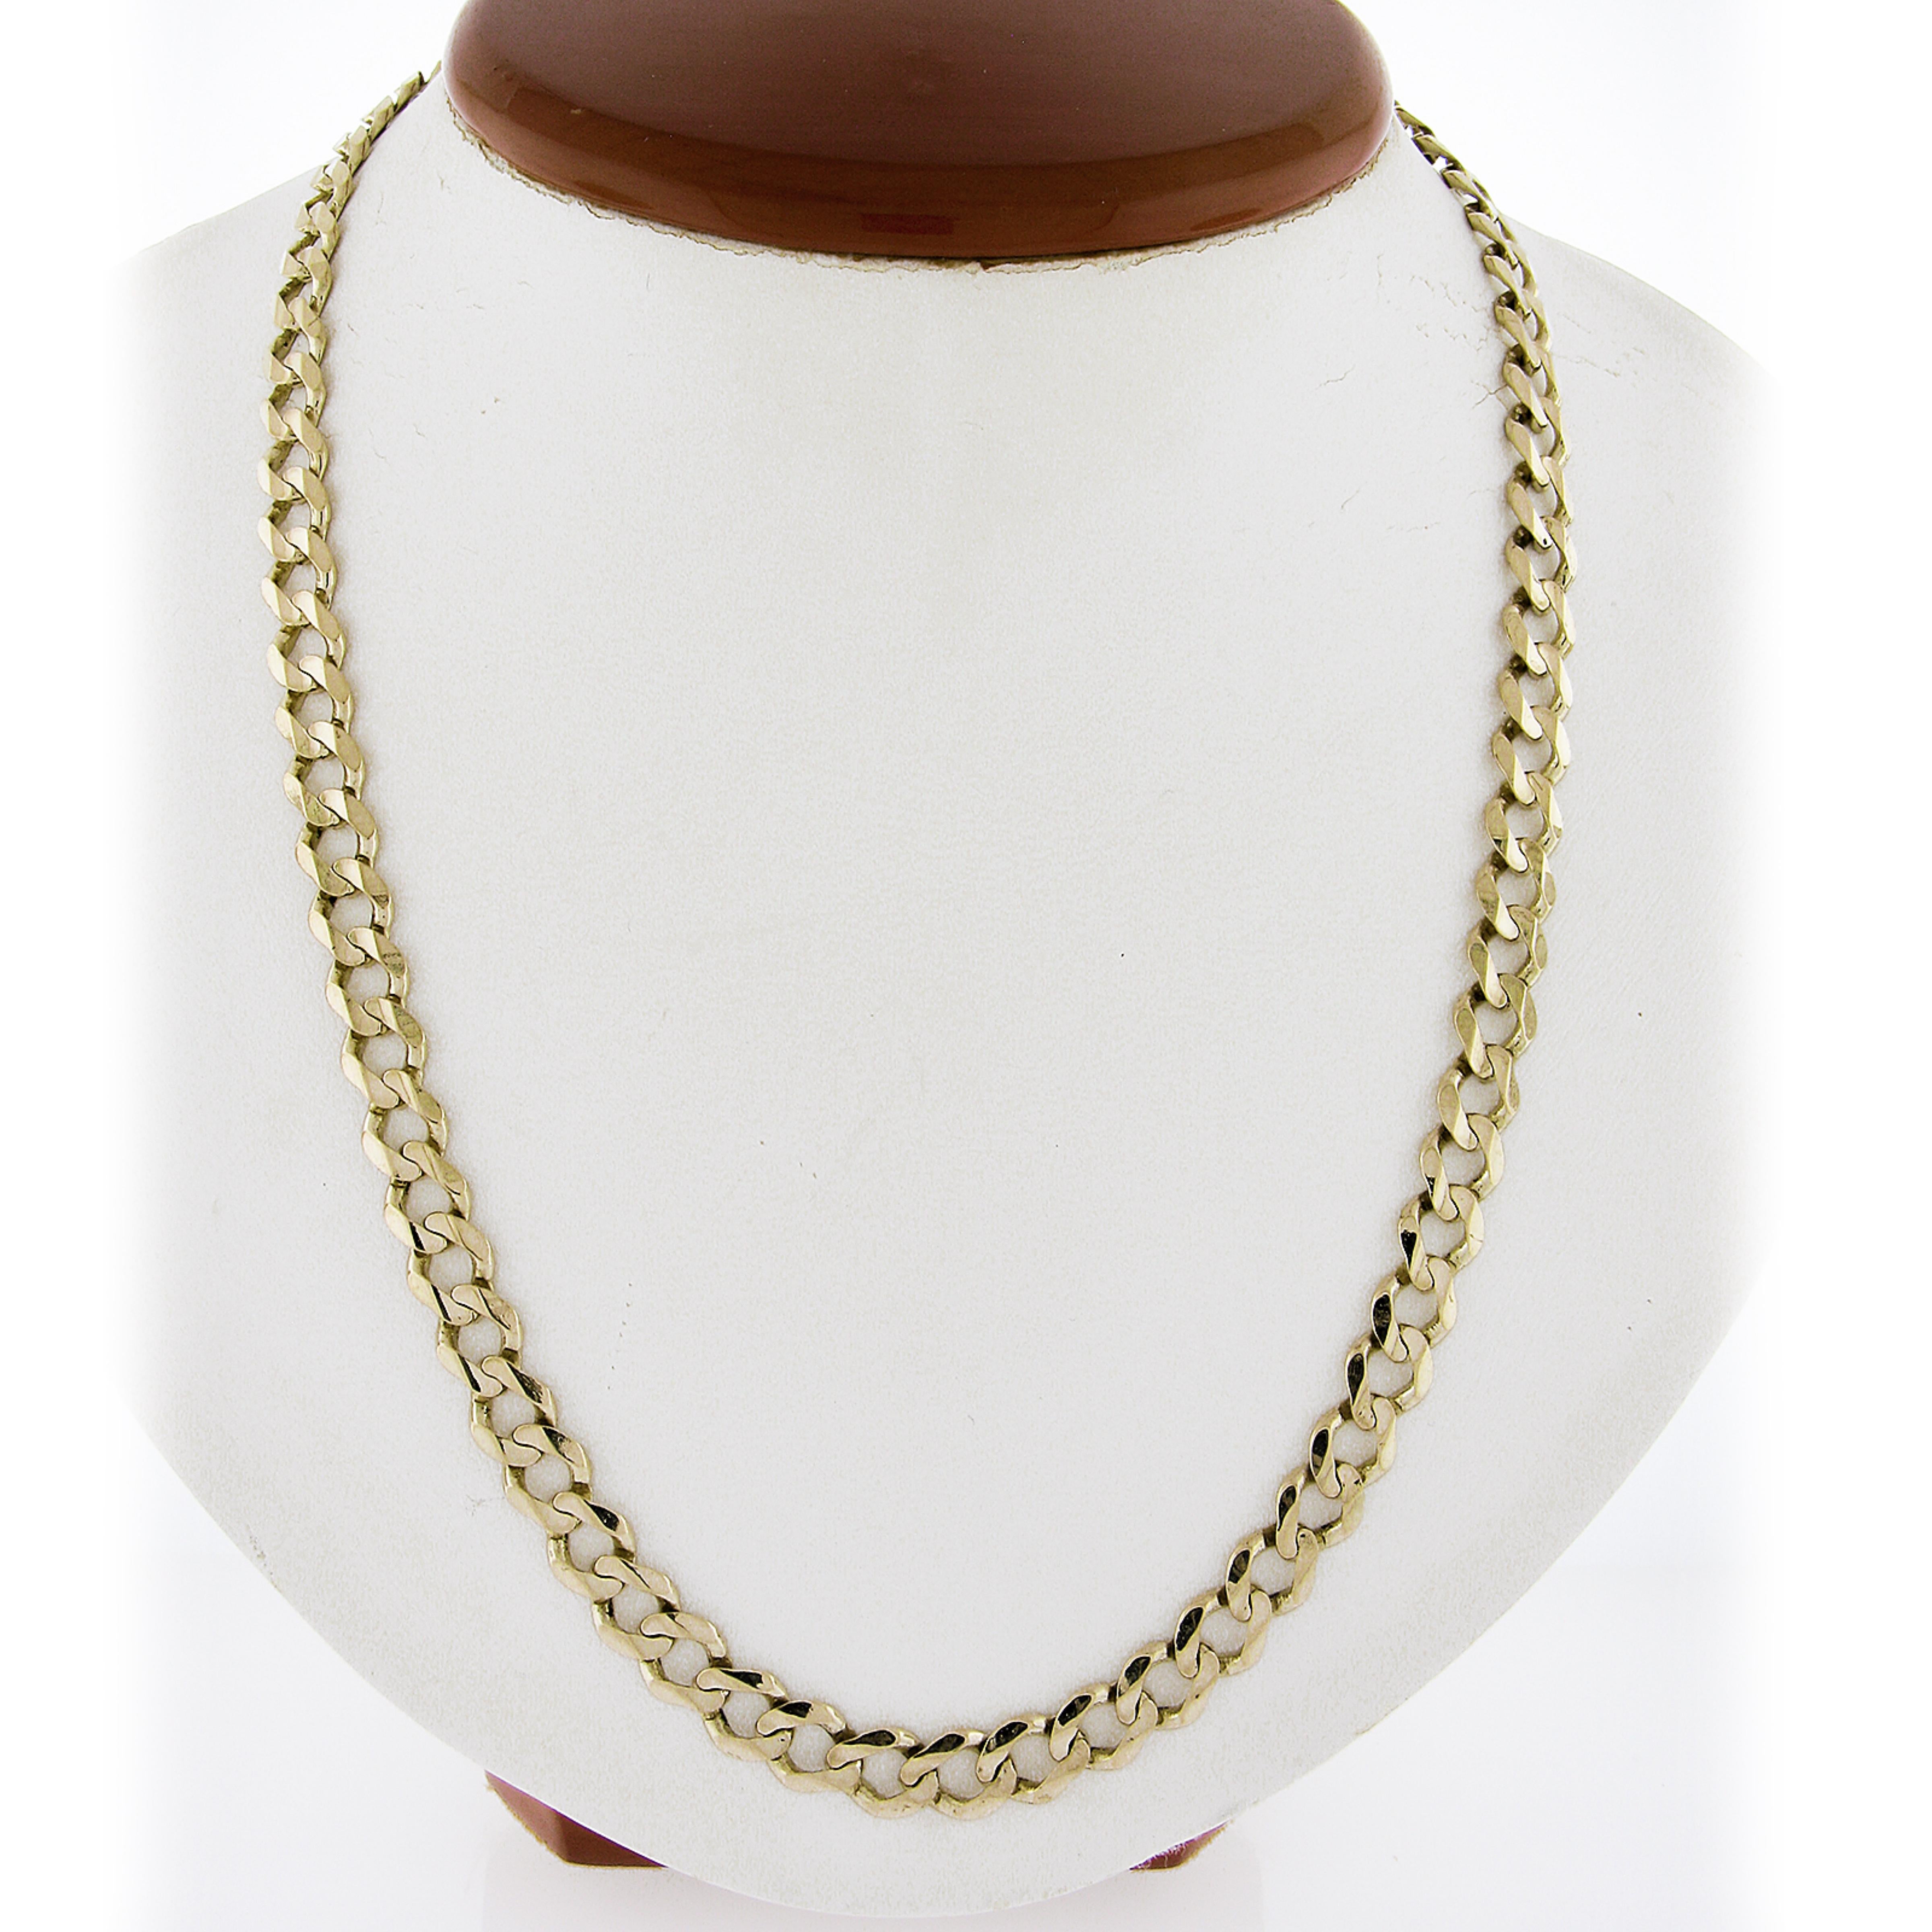 Material: Solid 14k Yellow Gold
Weight: 37.43 Grams
Chain Type: Cuban/Curb Link Chain
Chain Length: 23 Inches
Chain Width: 7.1mm
Chain Thickness: 1.9mm
Clasp: Lobster Claw Clasp
End Cap Measurements: 6.1mm 
Condition: Excellent condition!
Stock